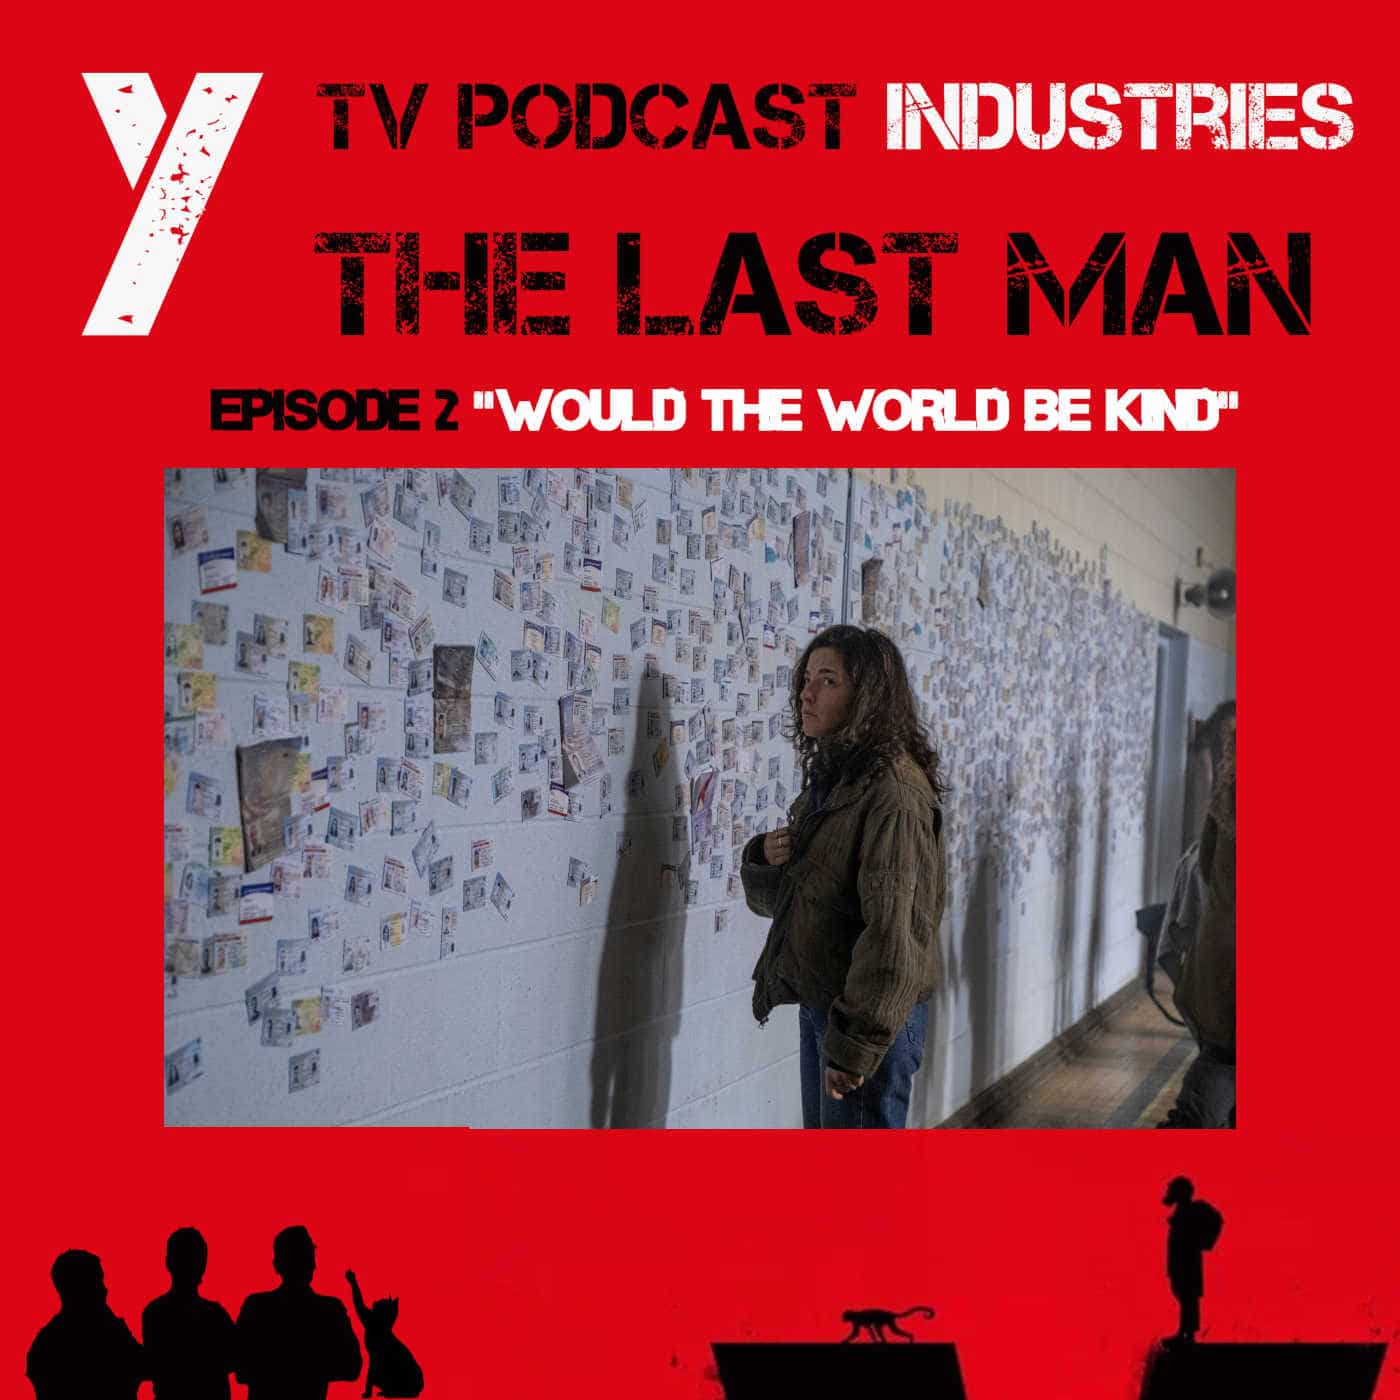 Y The Last Man Episode 2 "Would The World Be Kind" Podcast on TV Podcast Industries